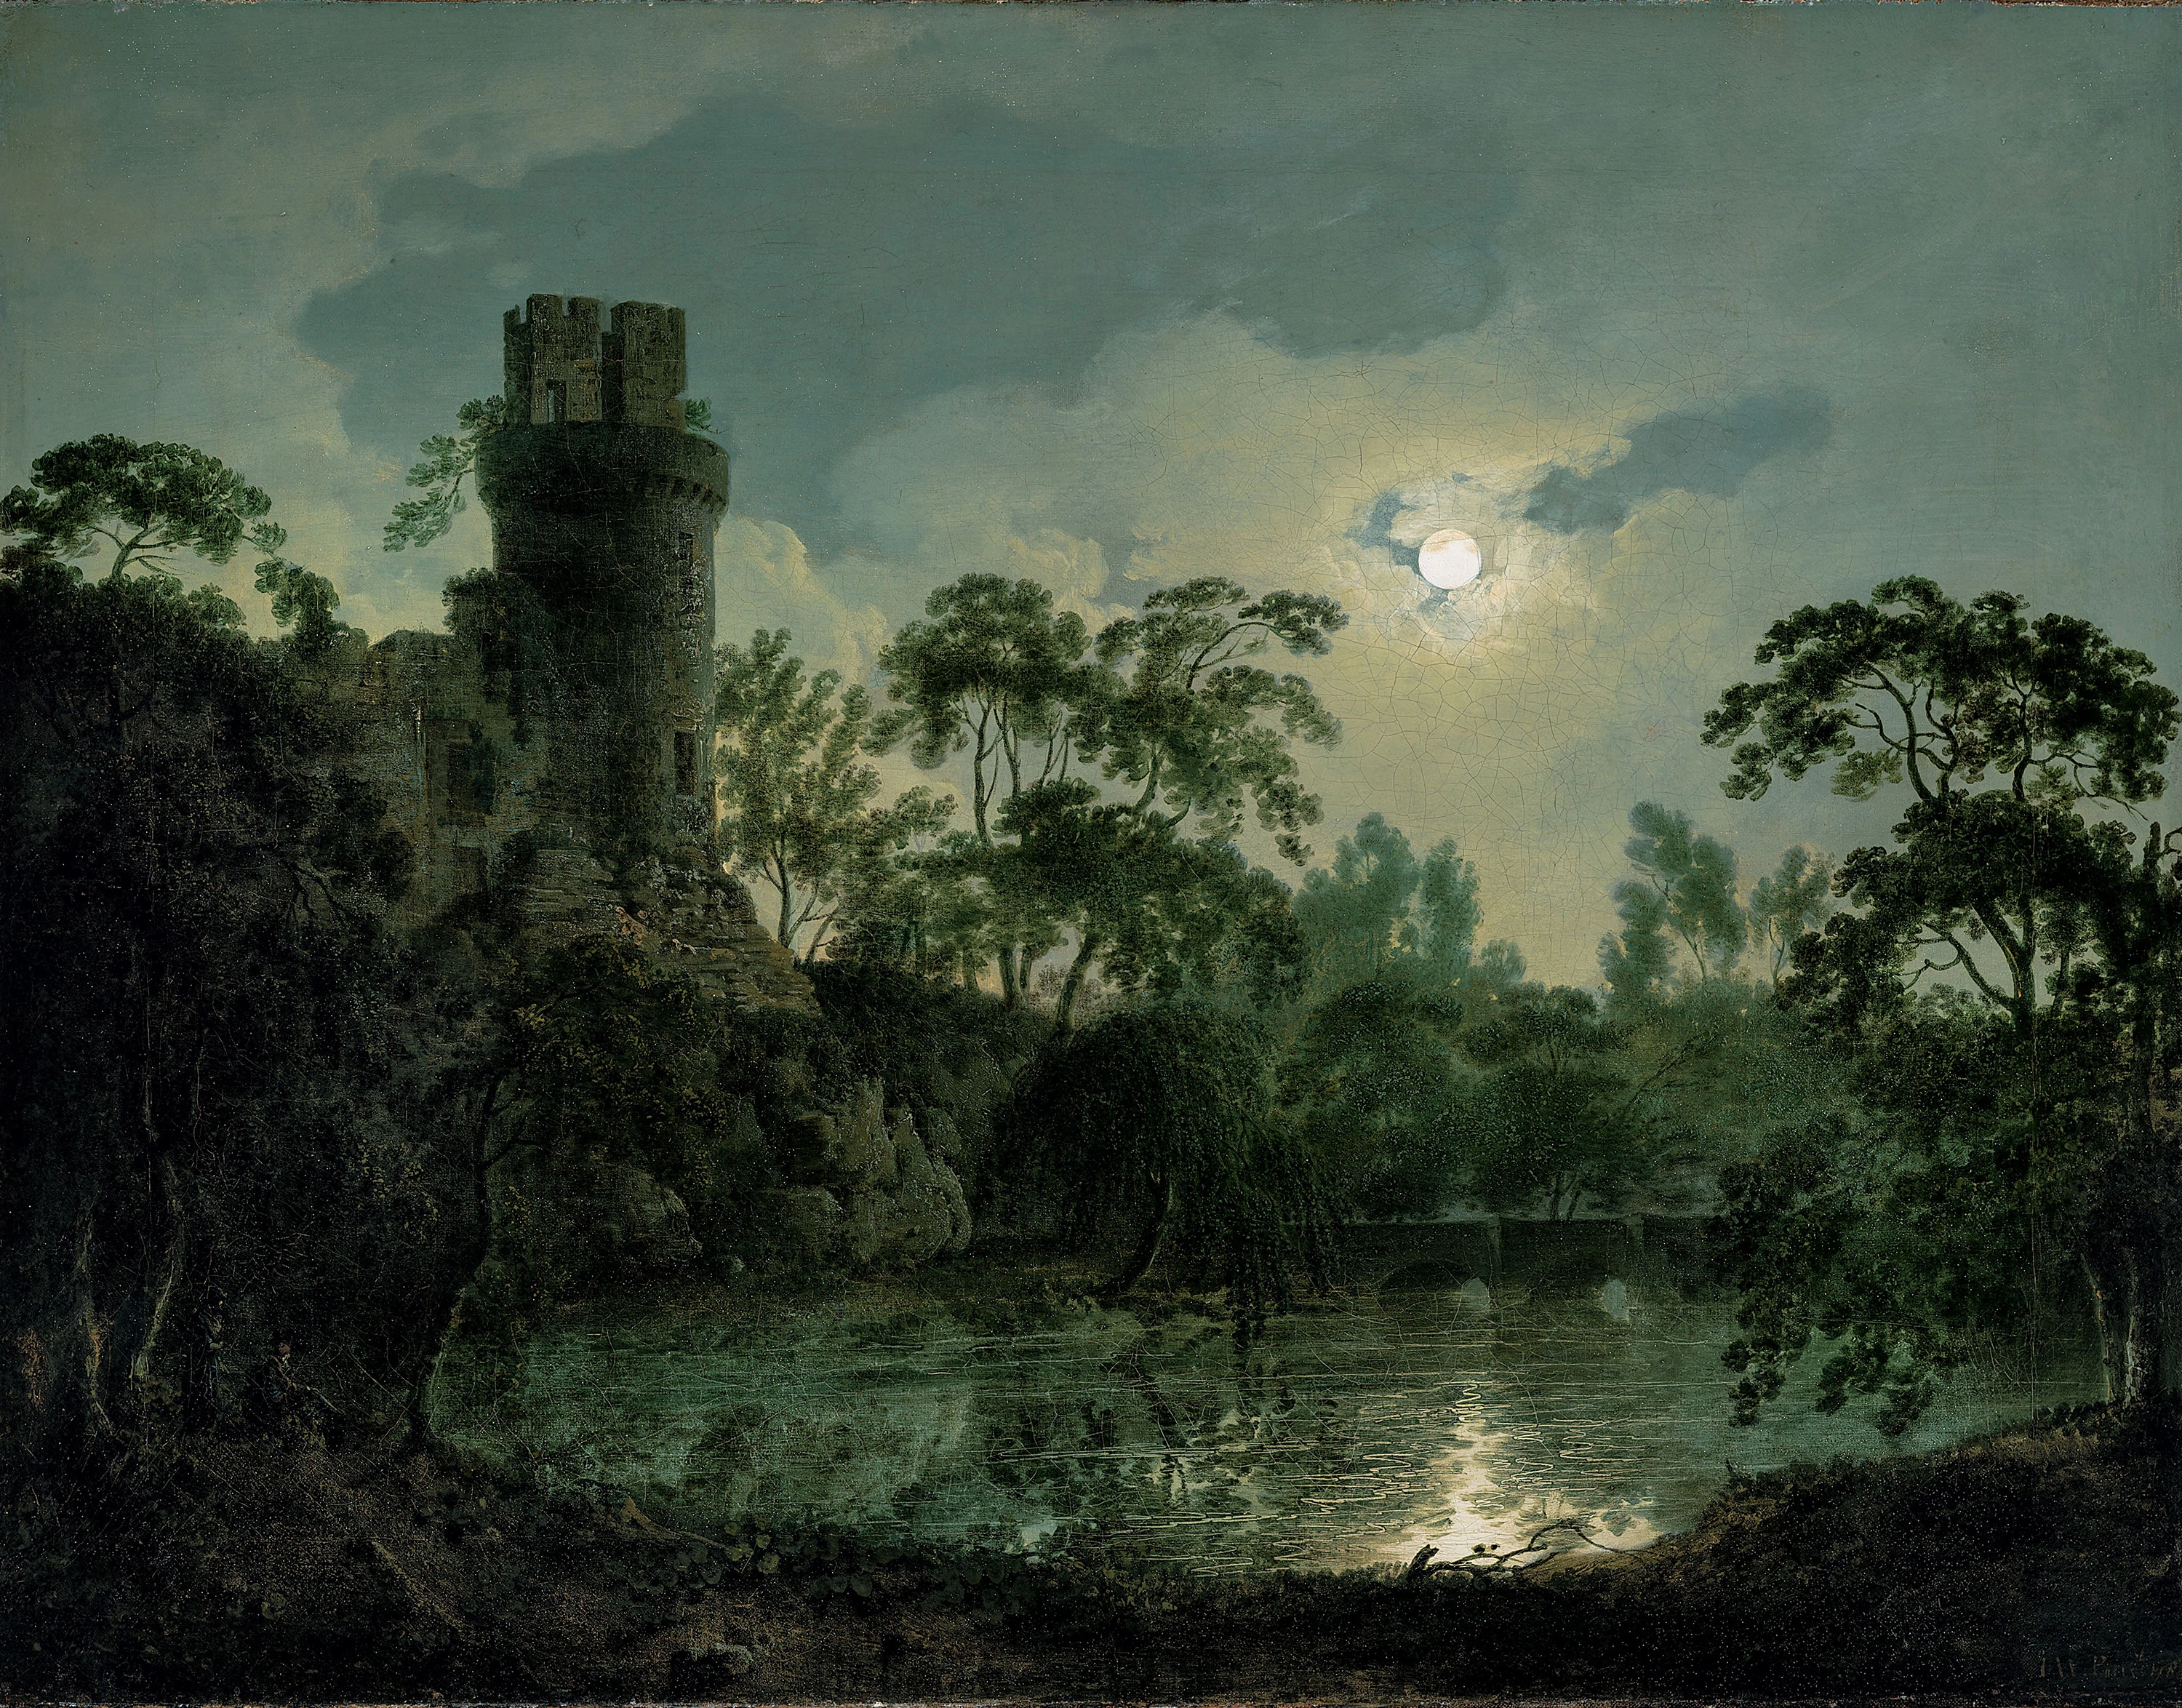 Lake by Moonlight with Castle on Hill, Joseph Wright of Derby